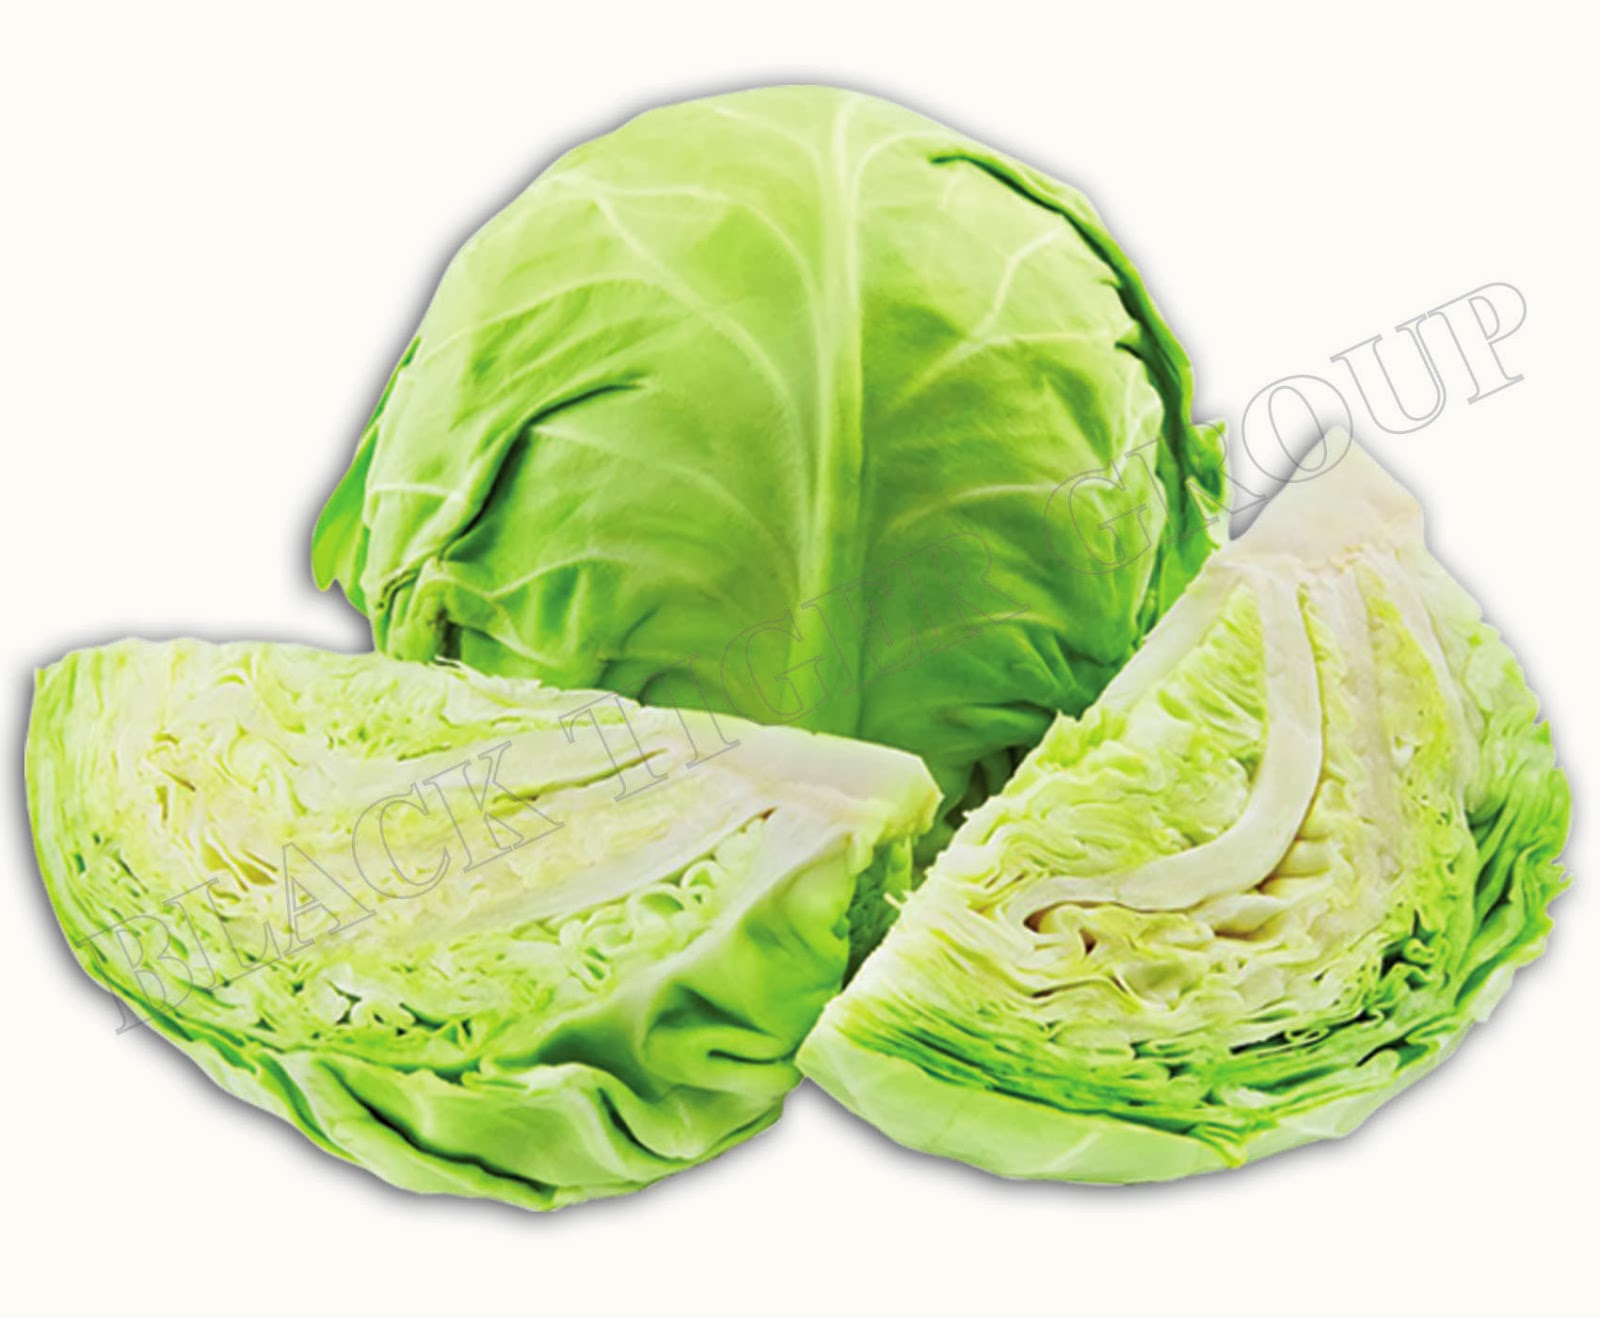 What is the scientific name for cabbage?